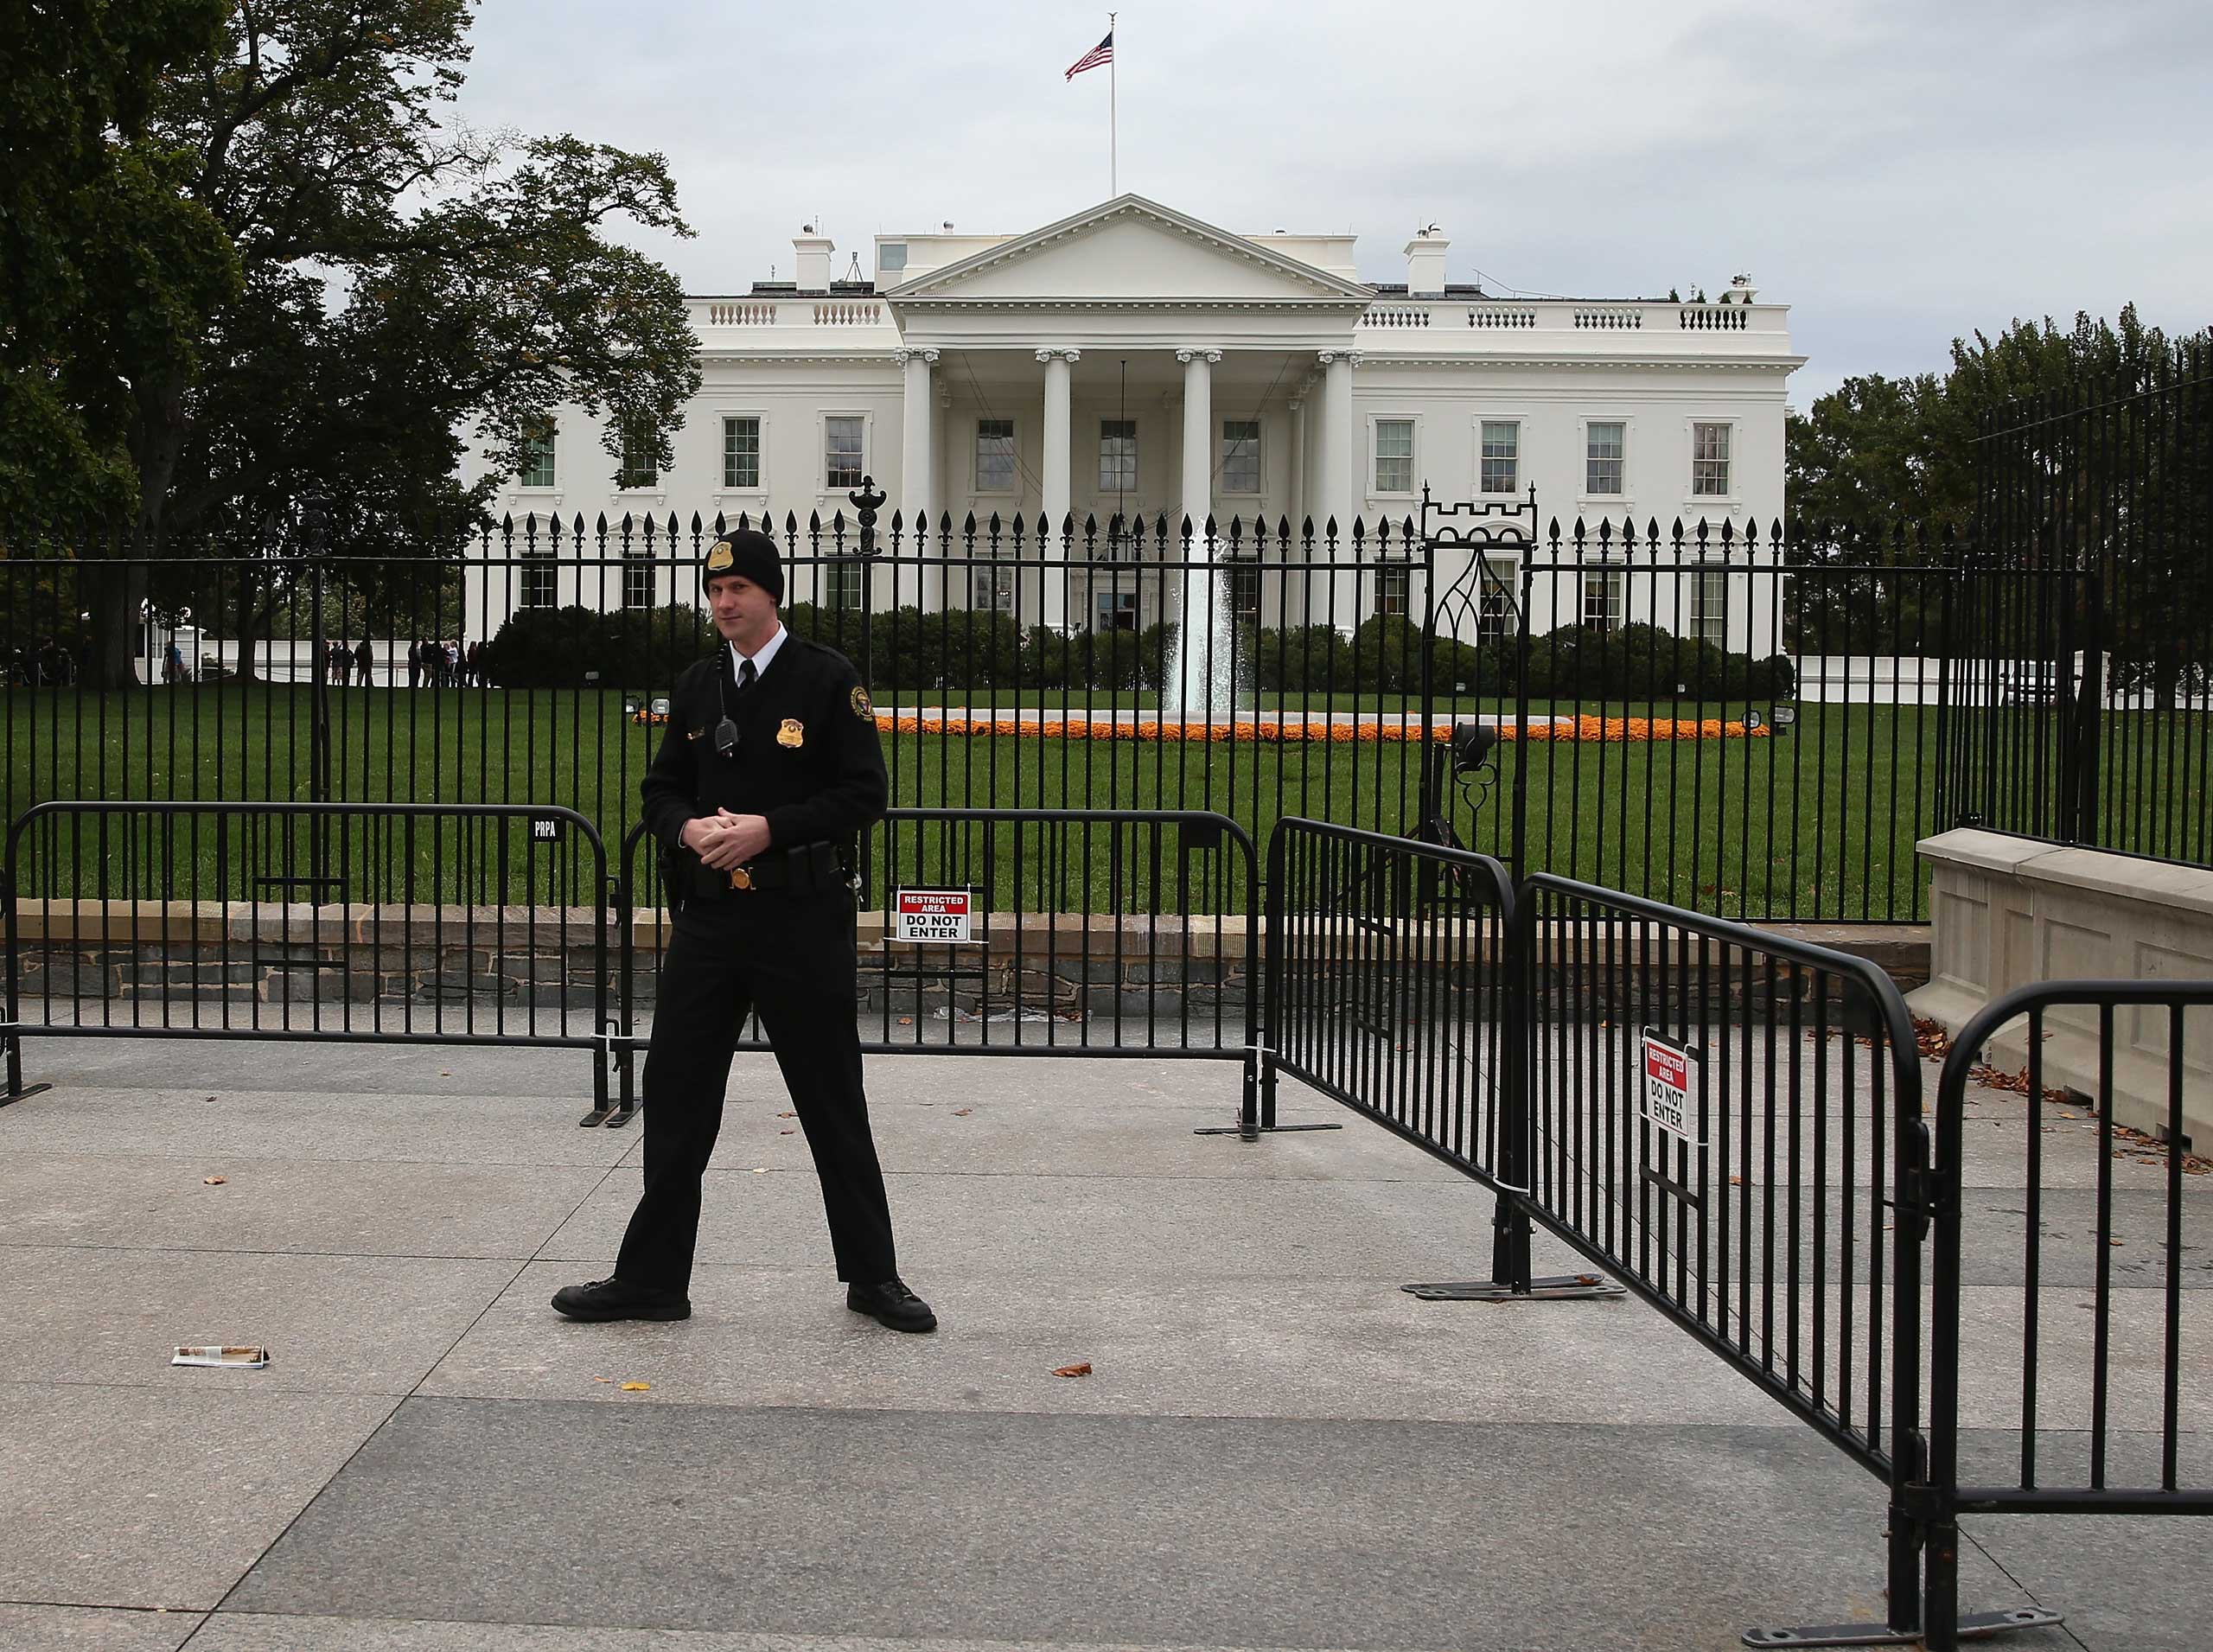 A member of the US Secret Service stands guard in front of the White House in Washington on Oct. 23, 2014.